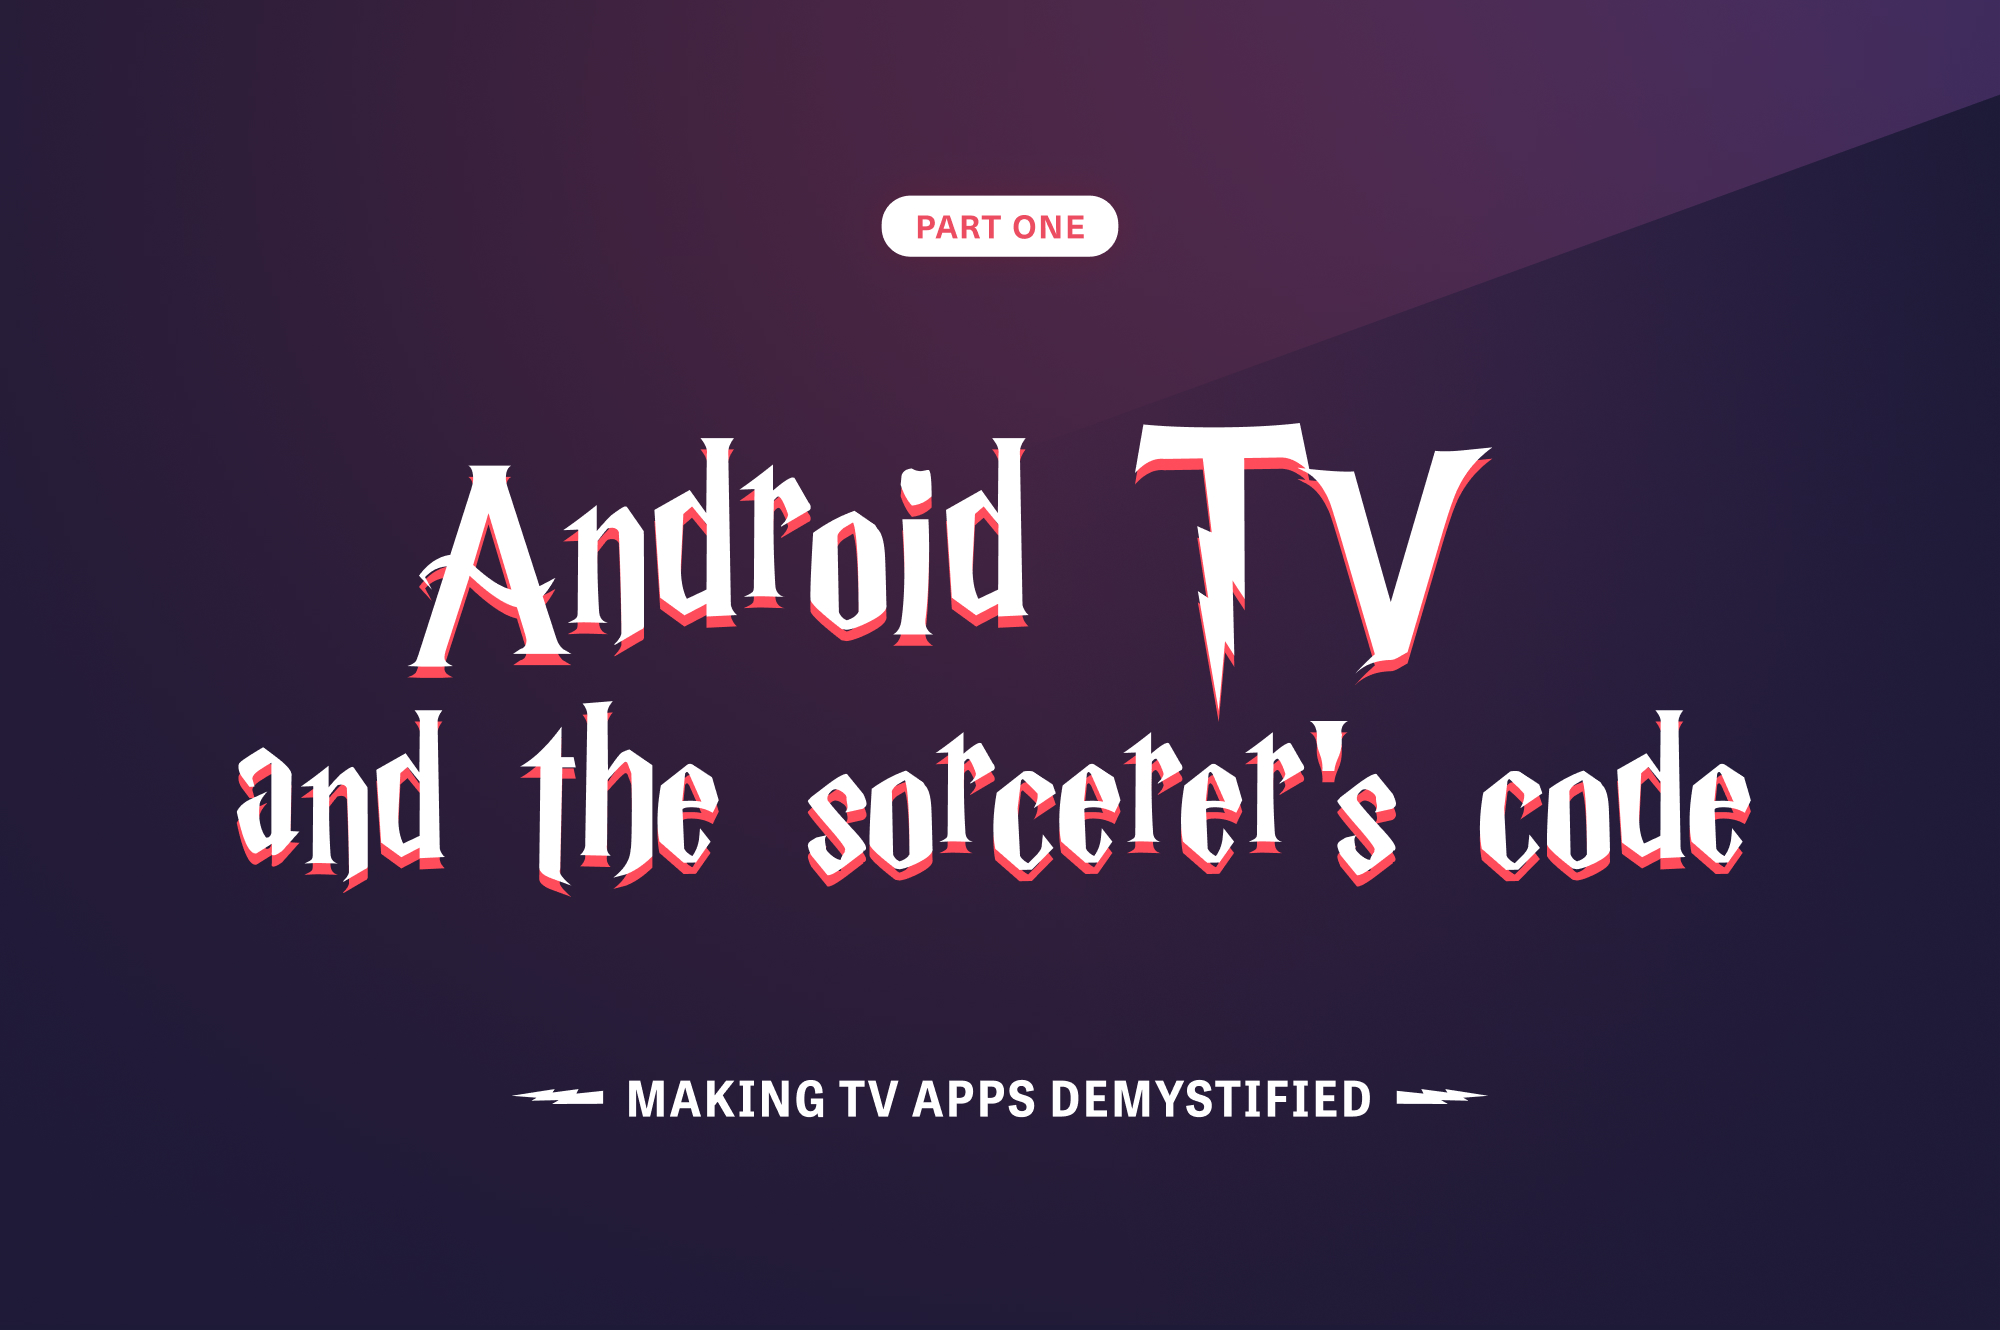 Making Android TV apps